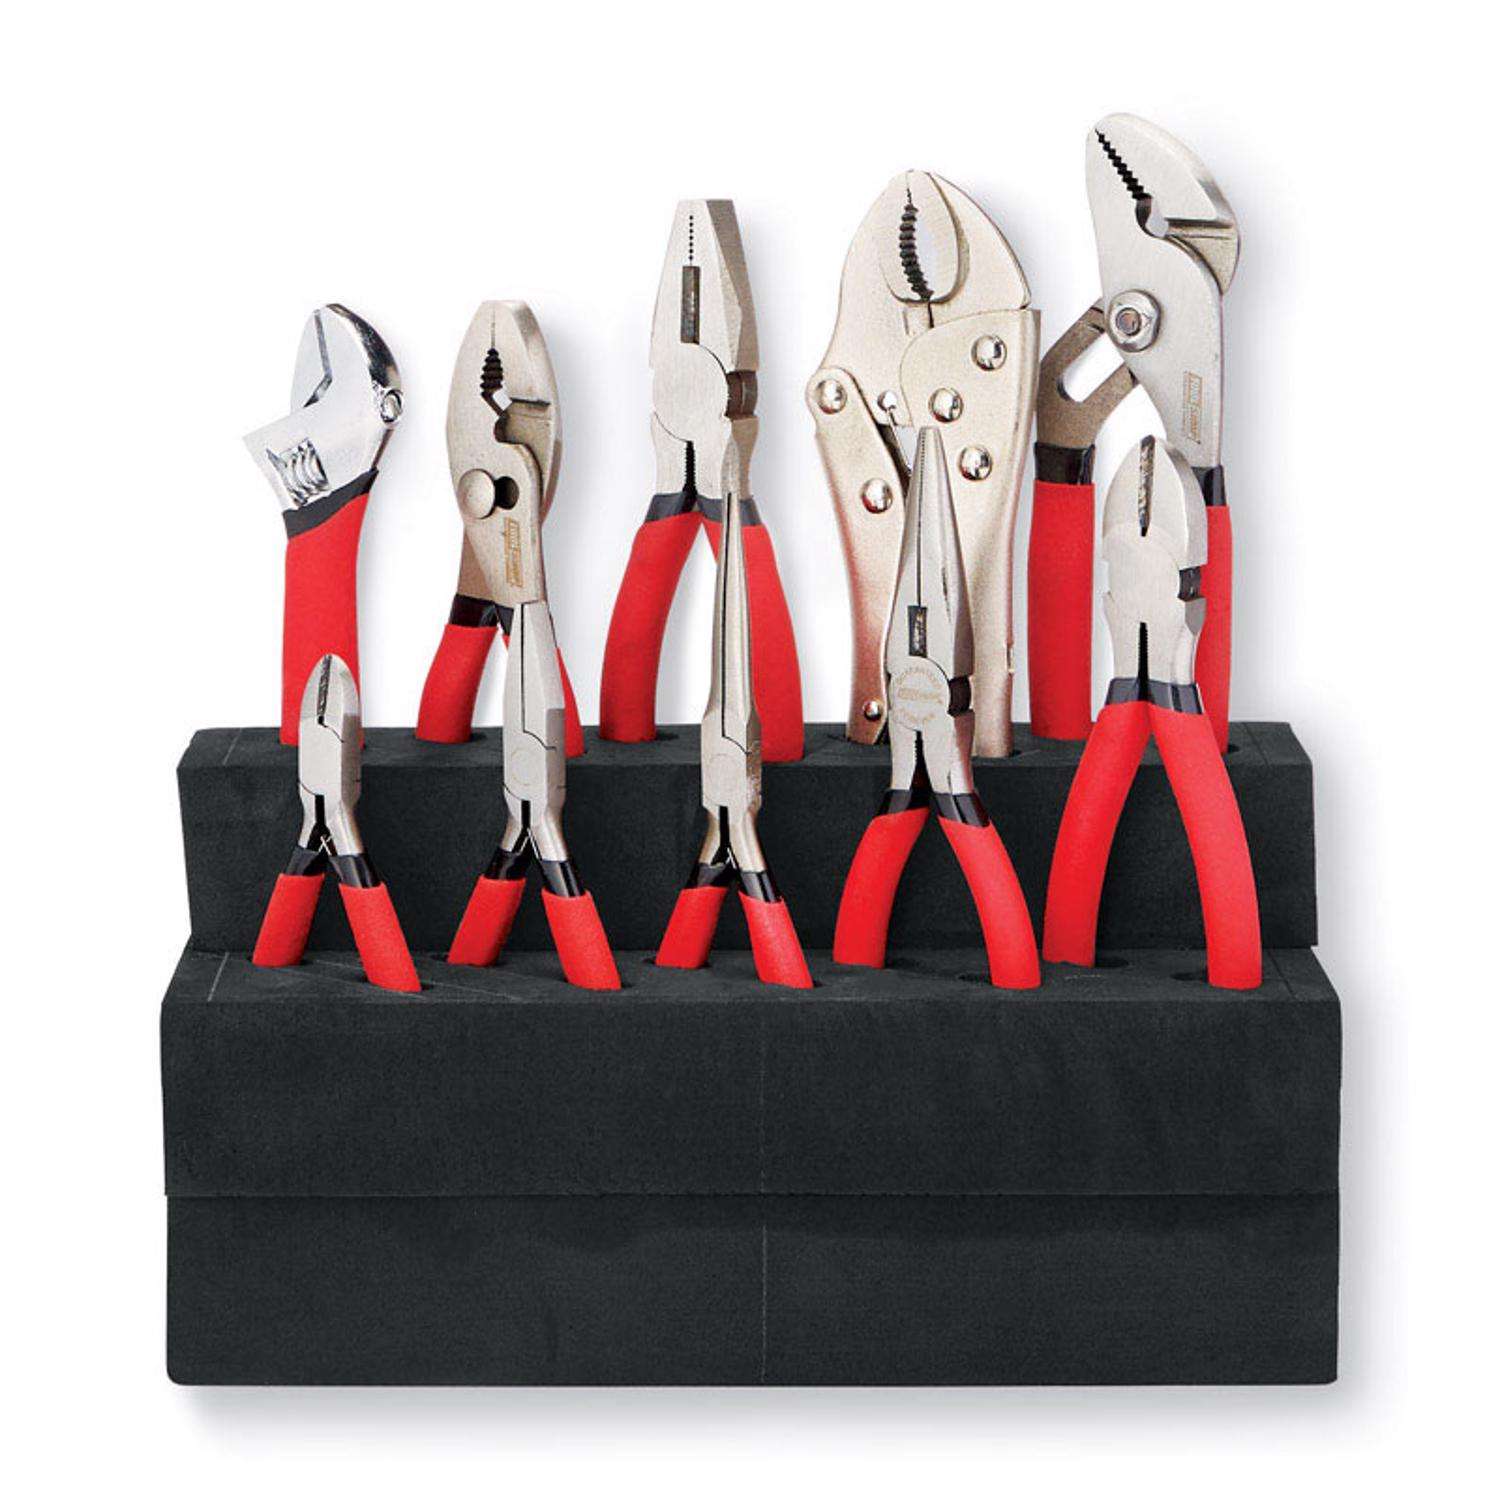 Ace 10 PC Carbon Steel Combination Pliers and Wrench Set